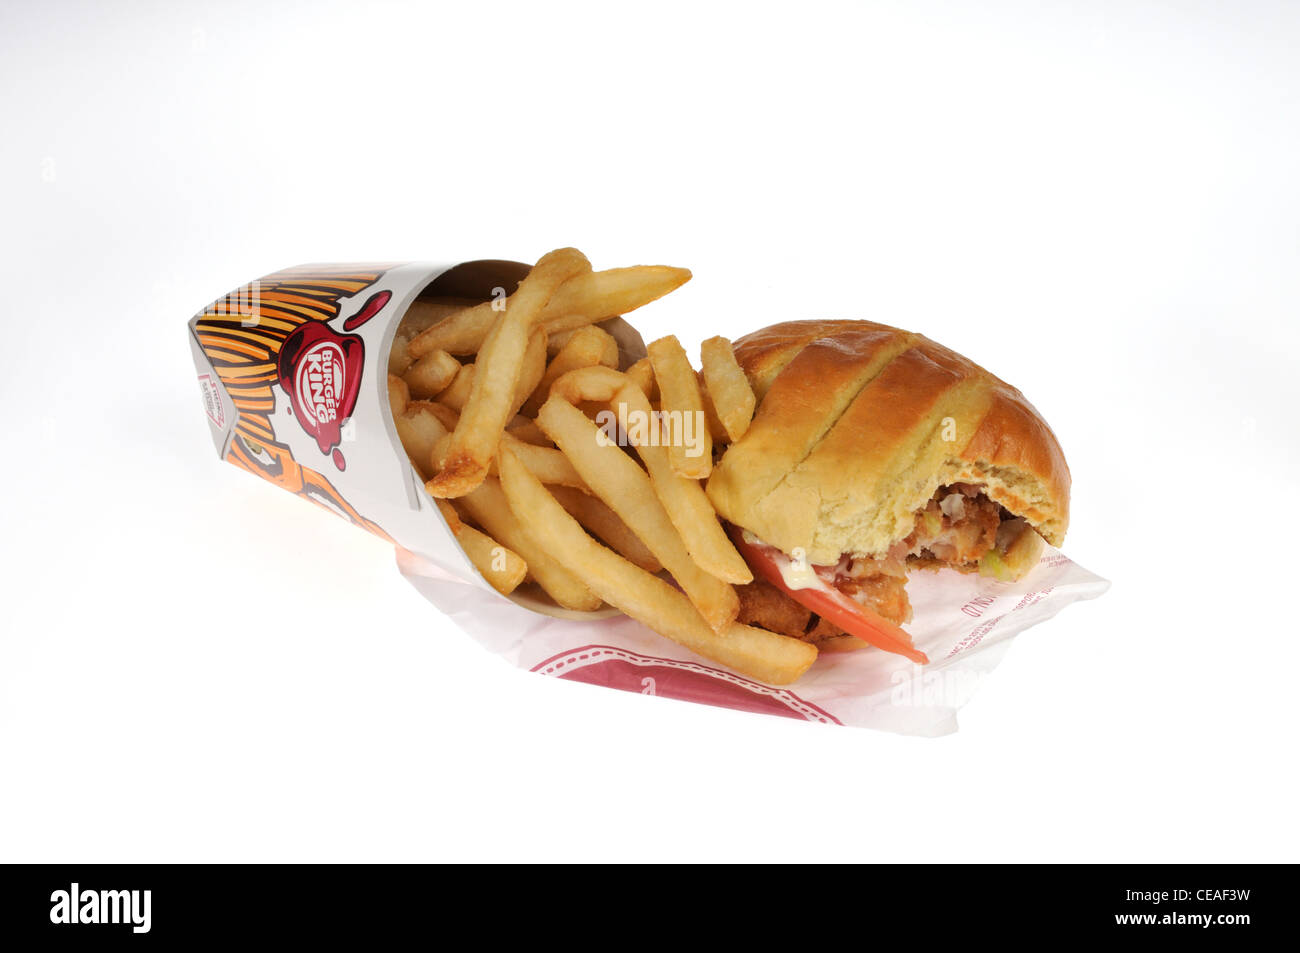 Burger King tender crisp chicken sandwich on artisan roll with french fries on white background cutout Stock Photo